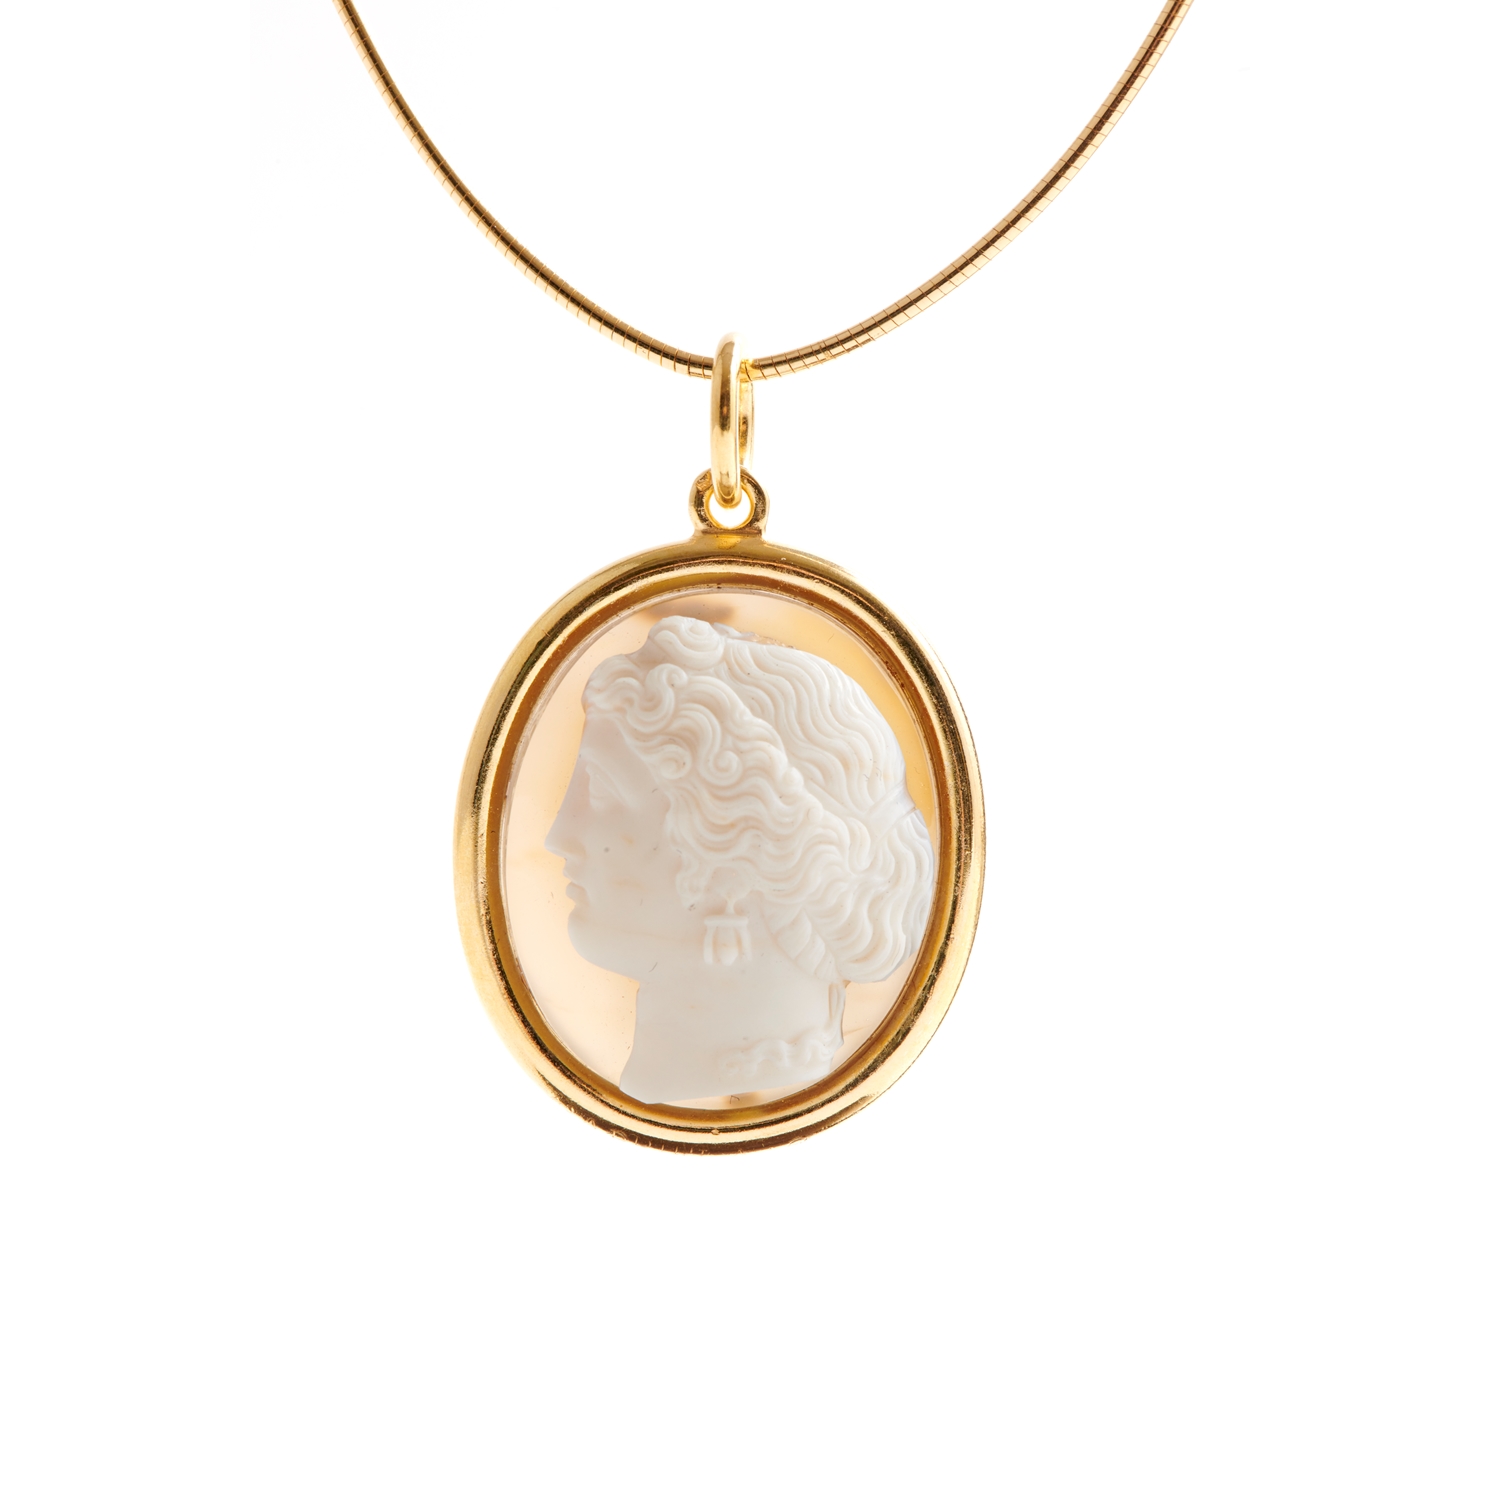 UNIQUE PENDANT WITH A CAMEO OF A NEOCLASSICAL PROFILE OF A WOMAN